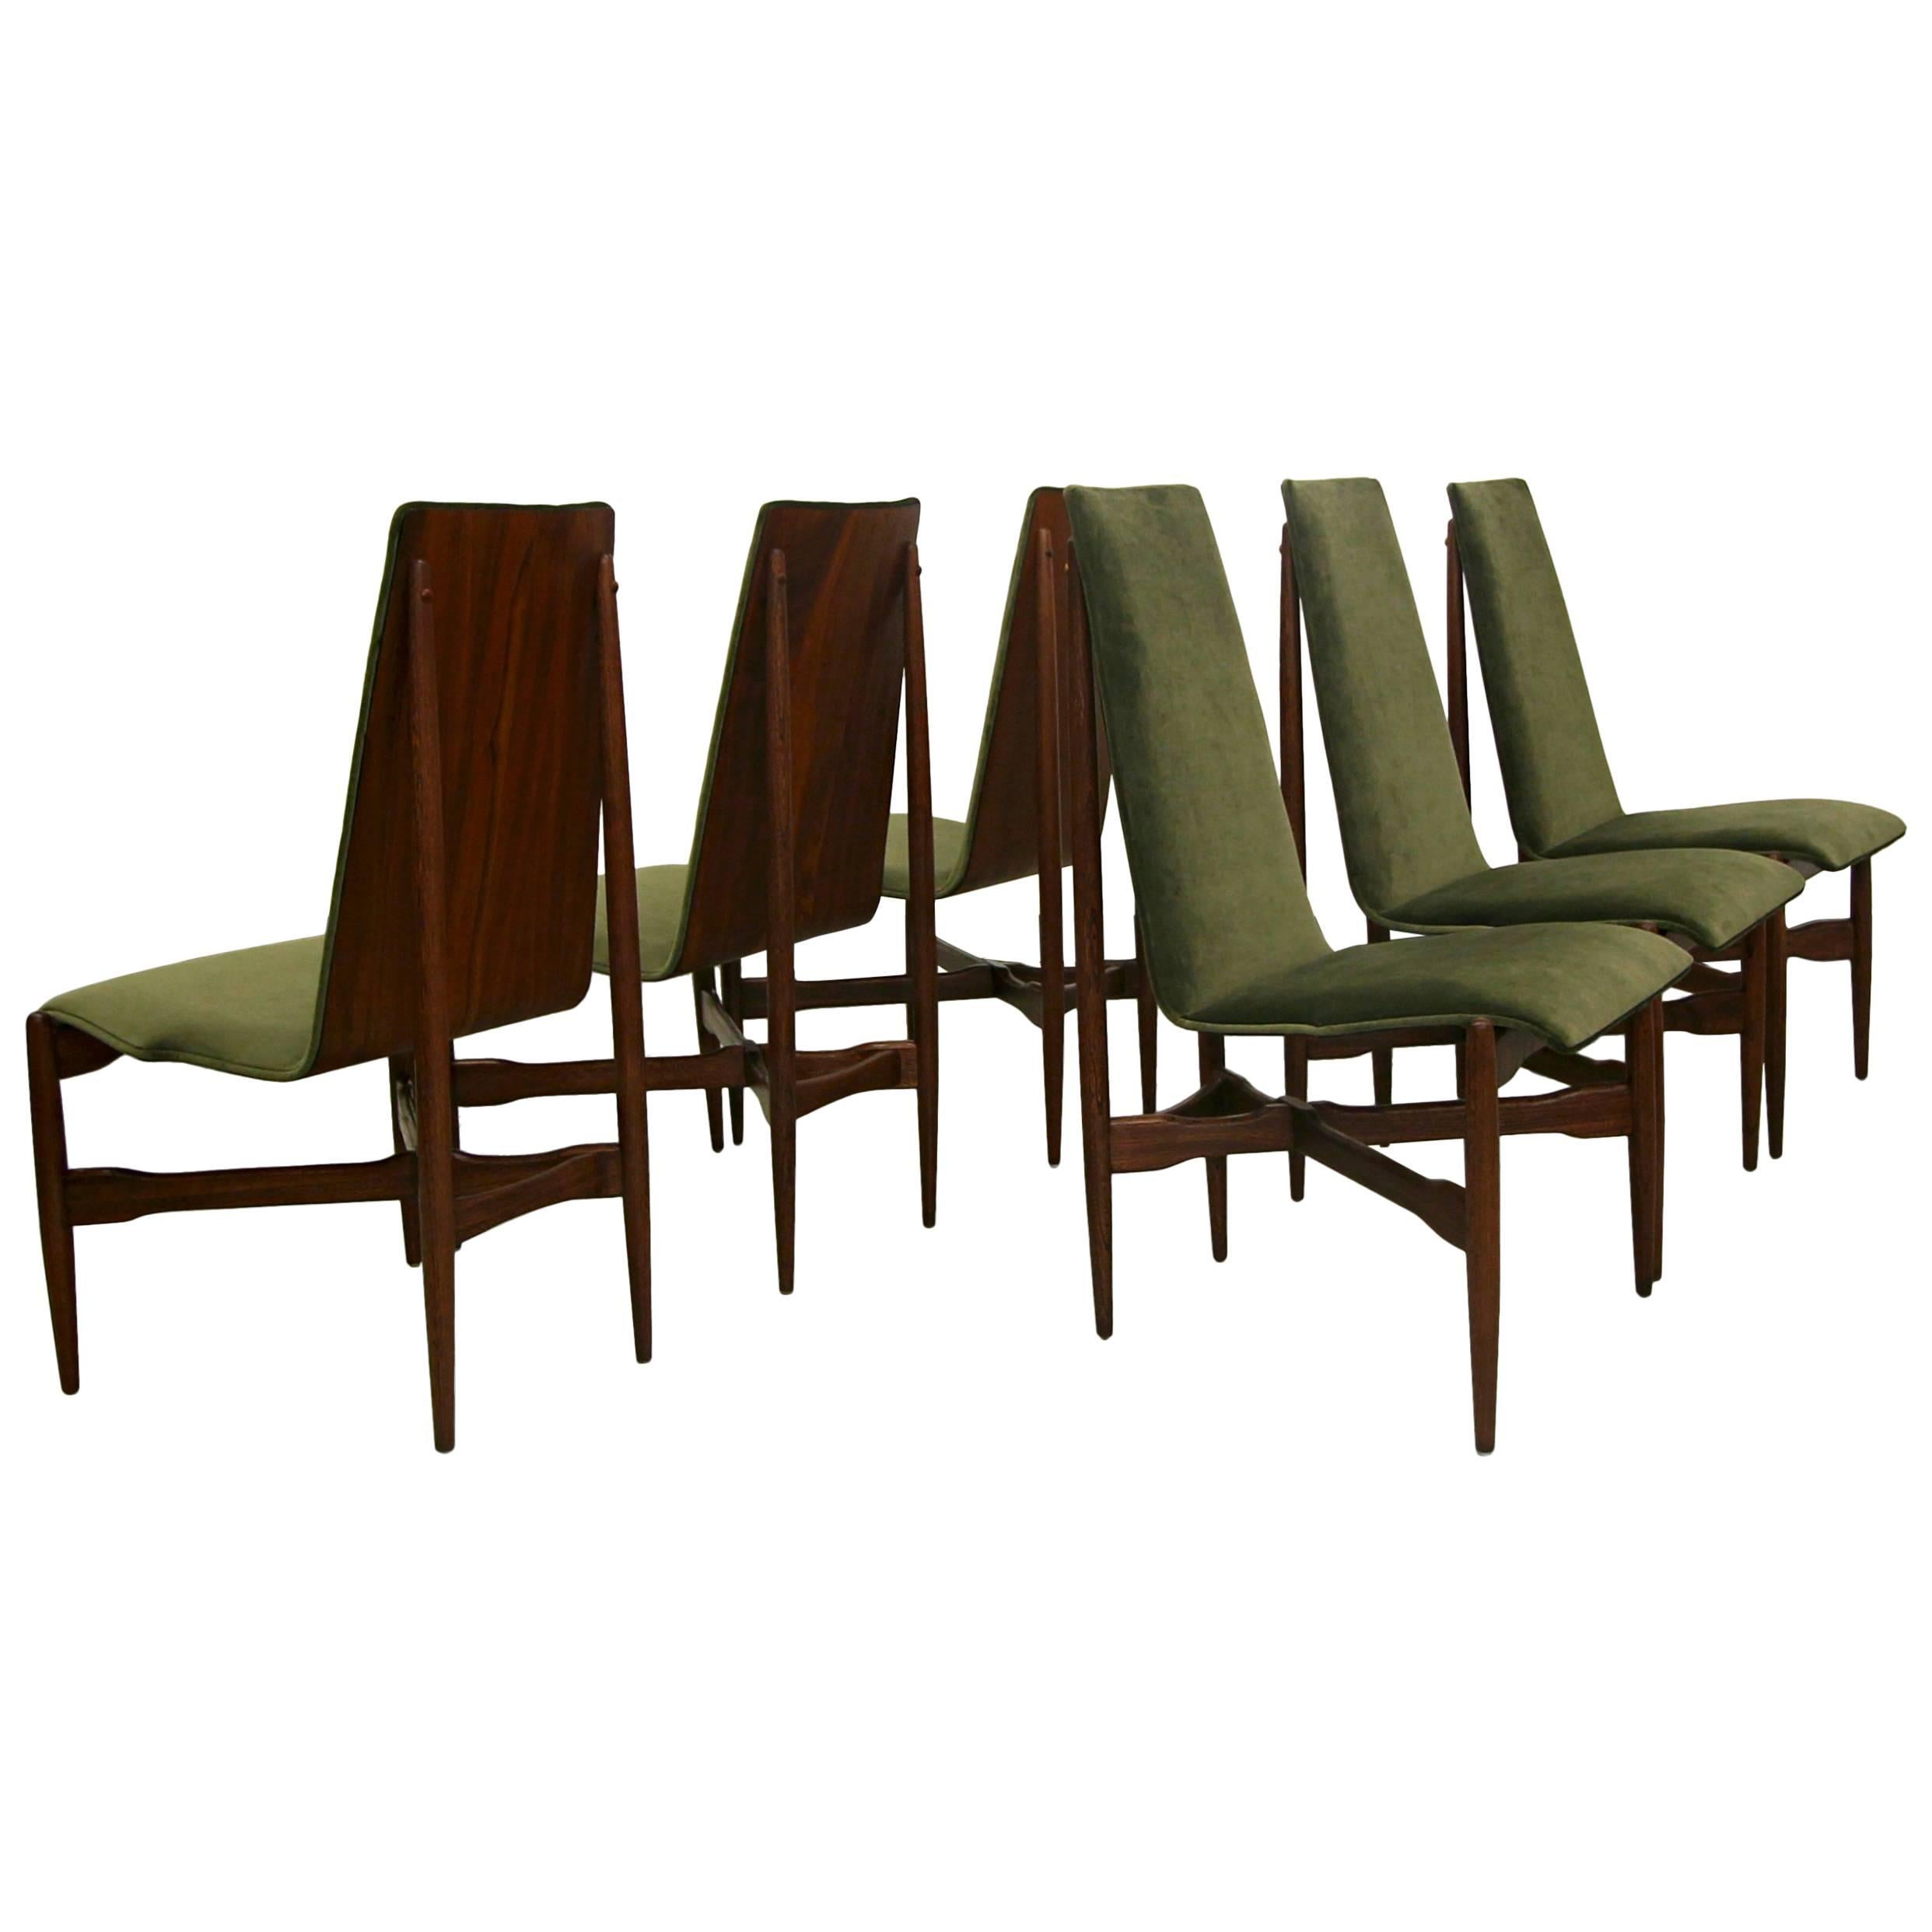 Set of Six Mid-Century Bentwood Dining Chairs by Kodawood